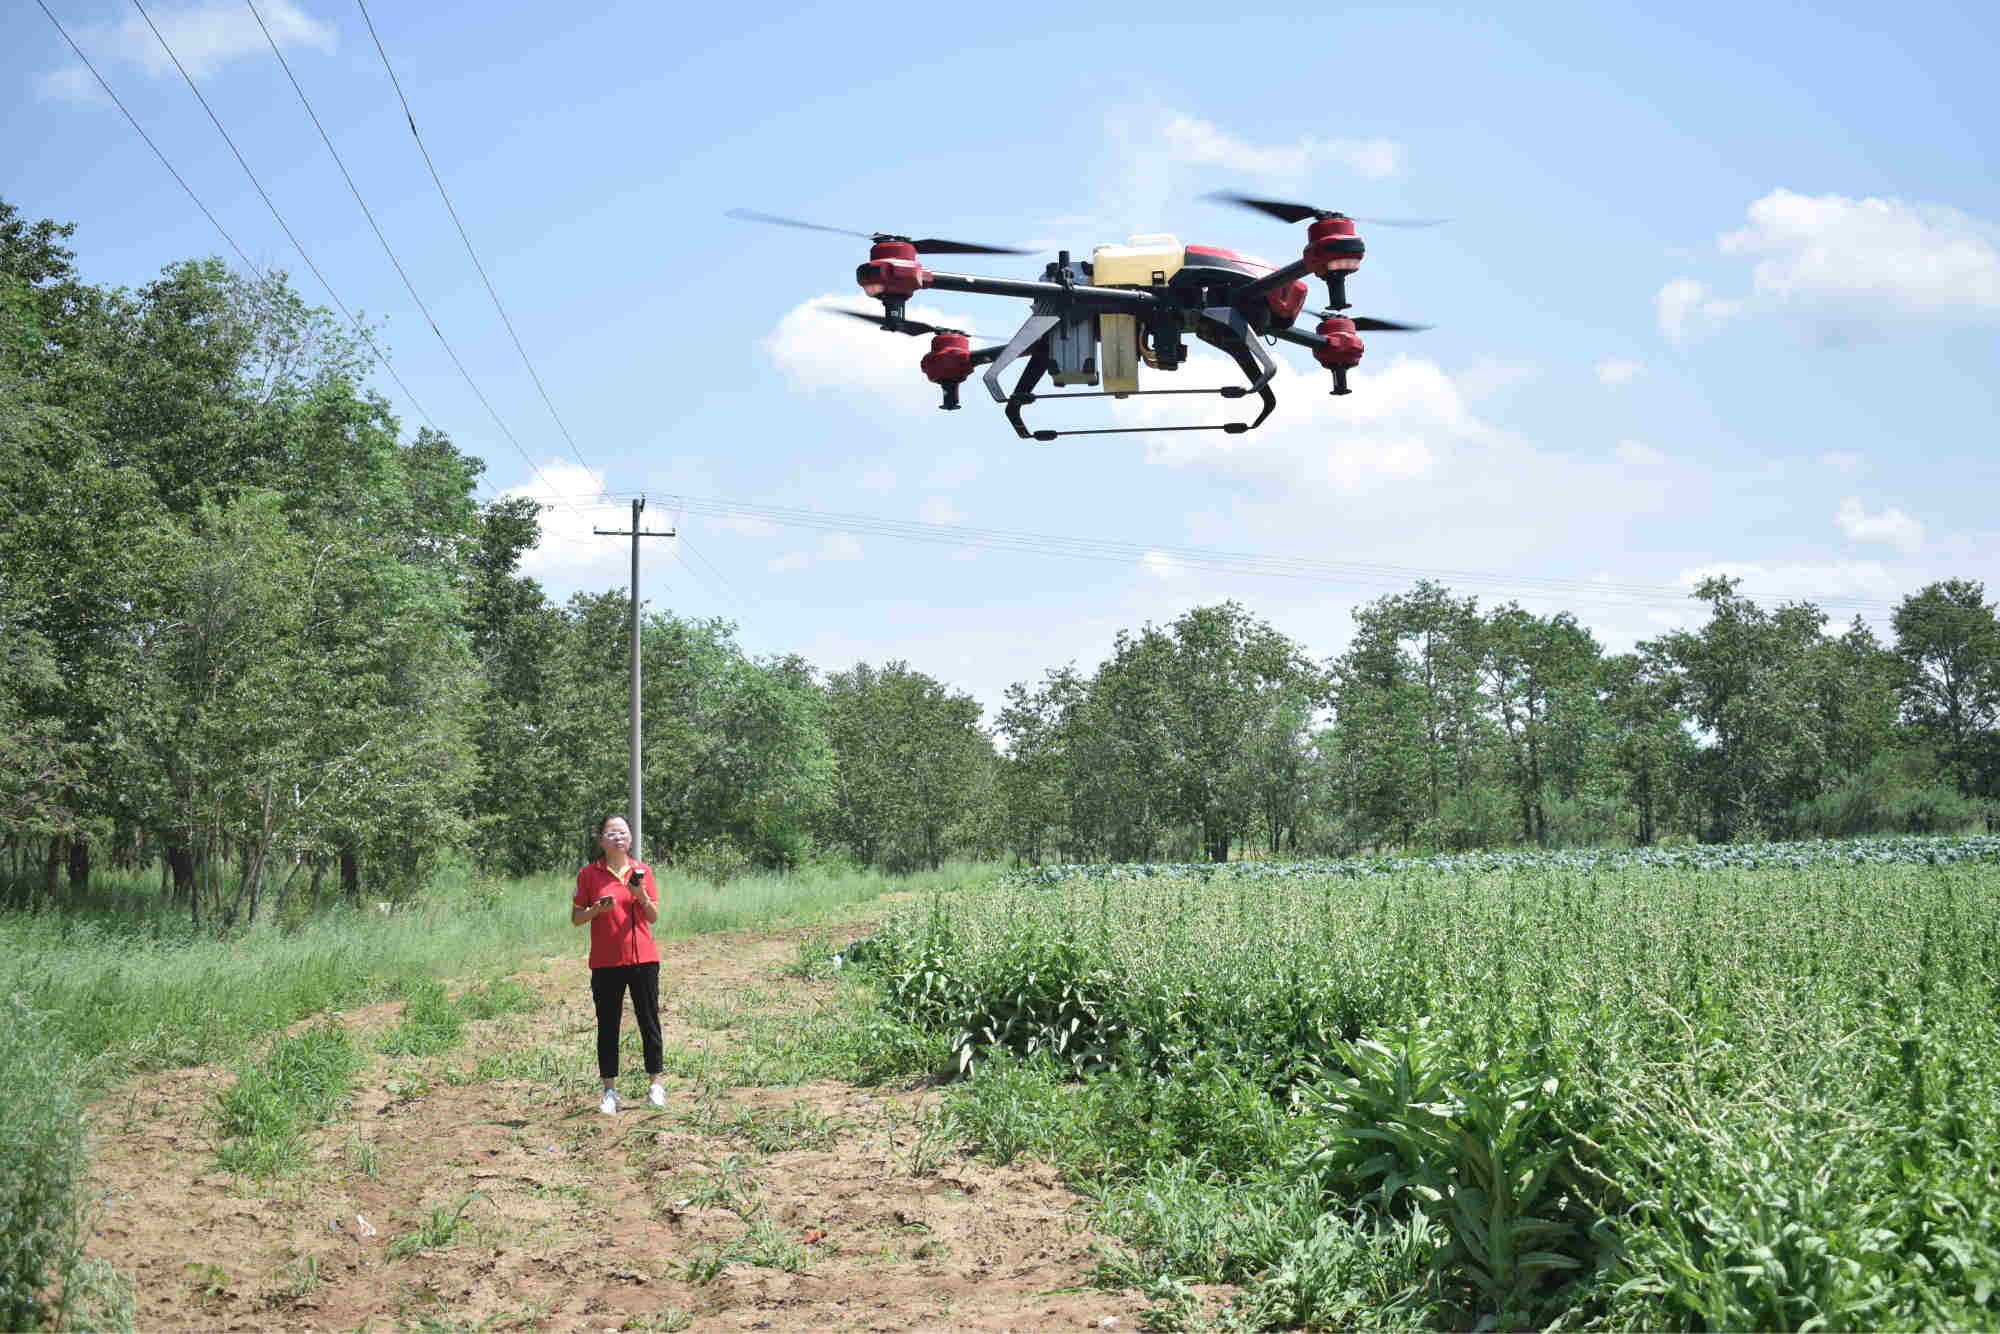 Sheng operates the drone to perform pest control